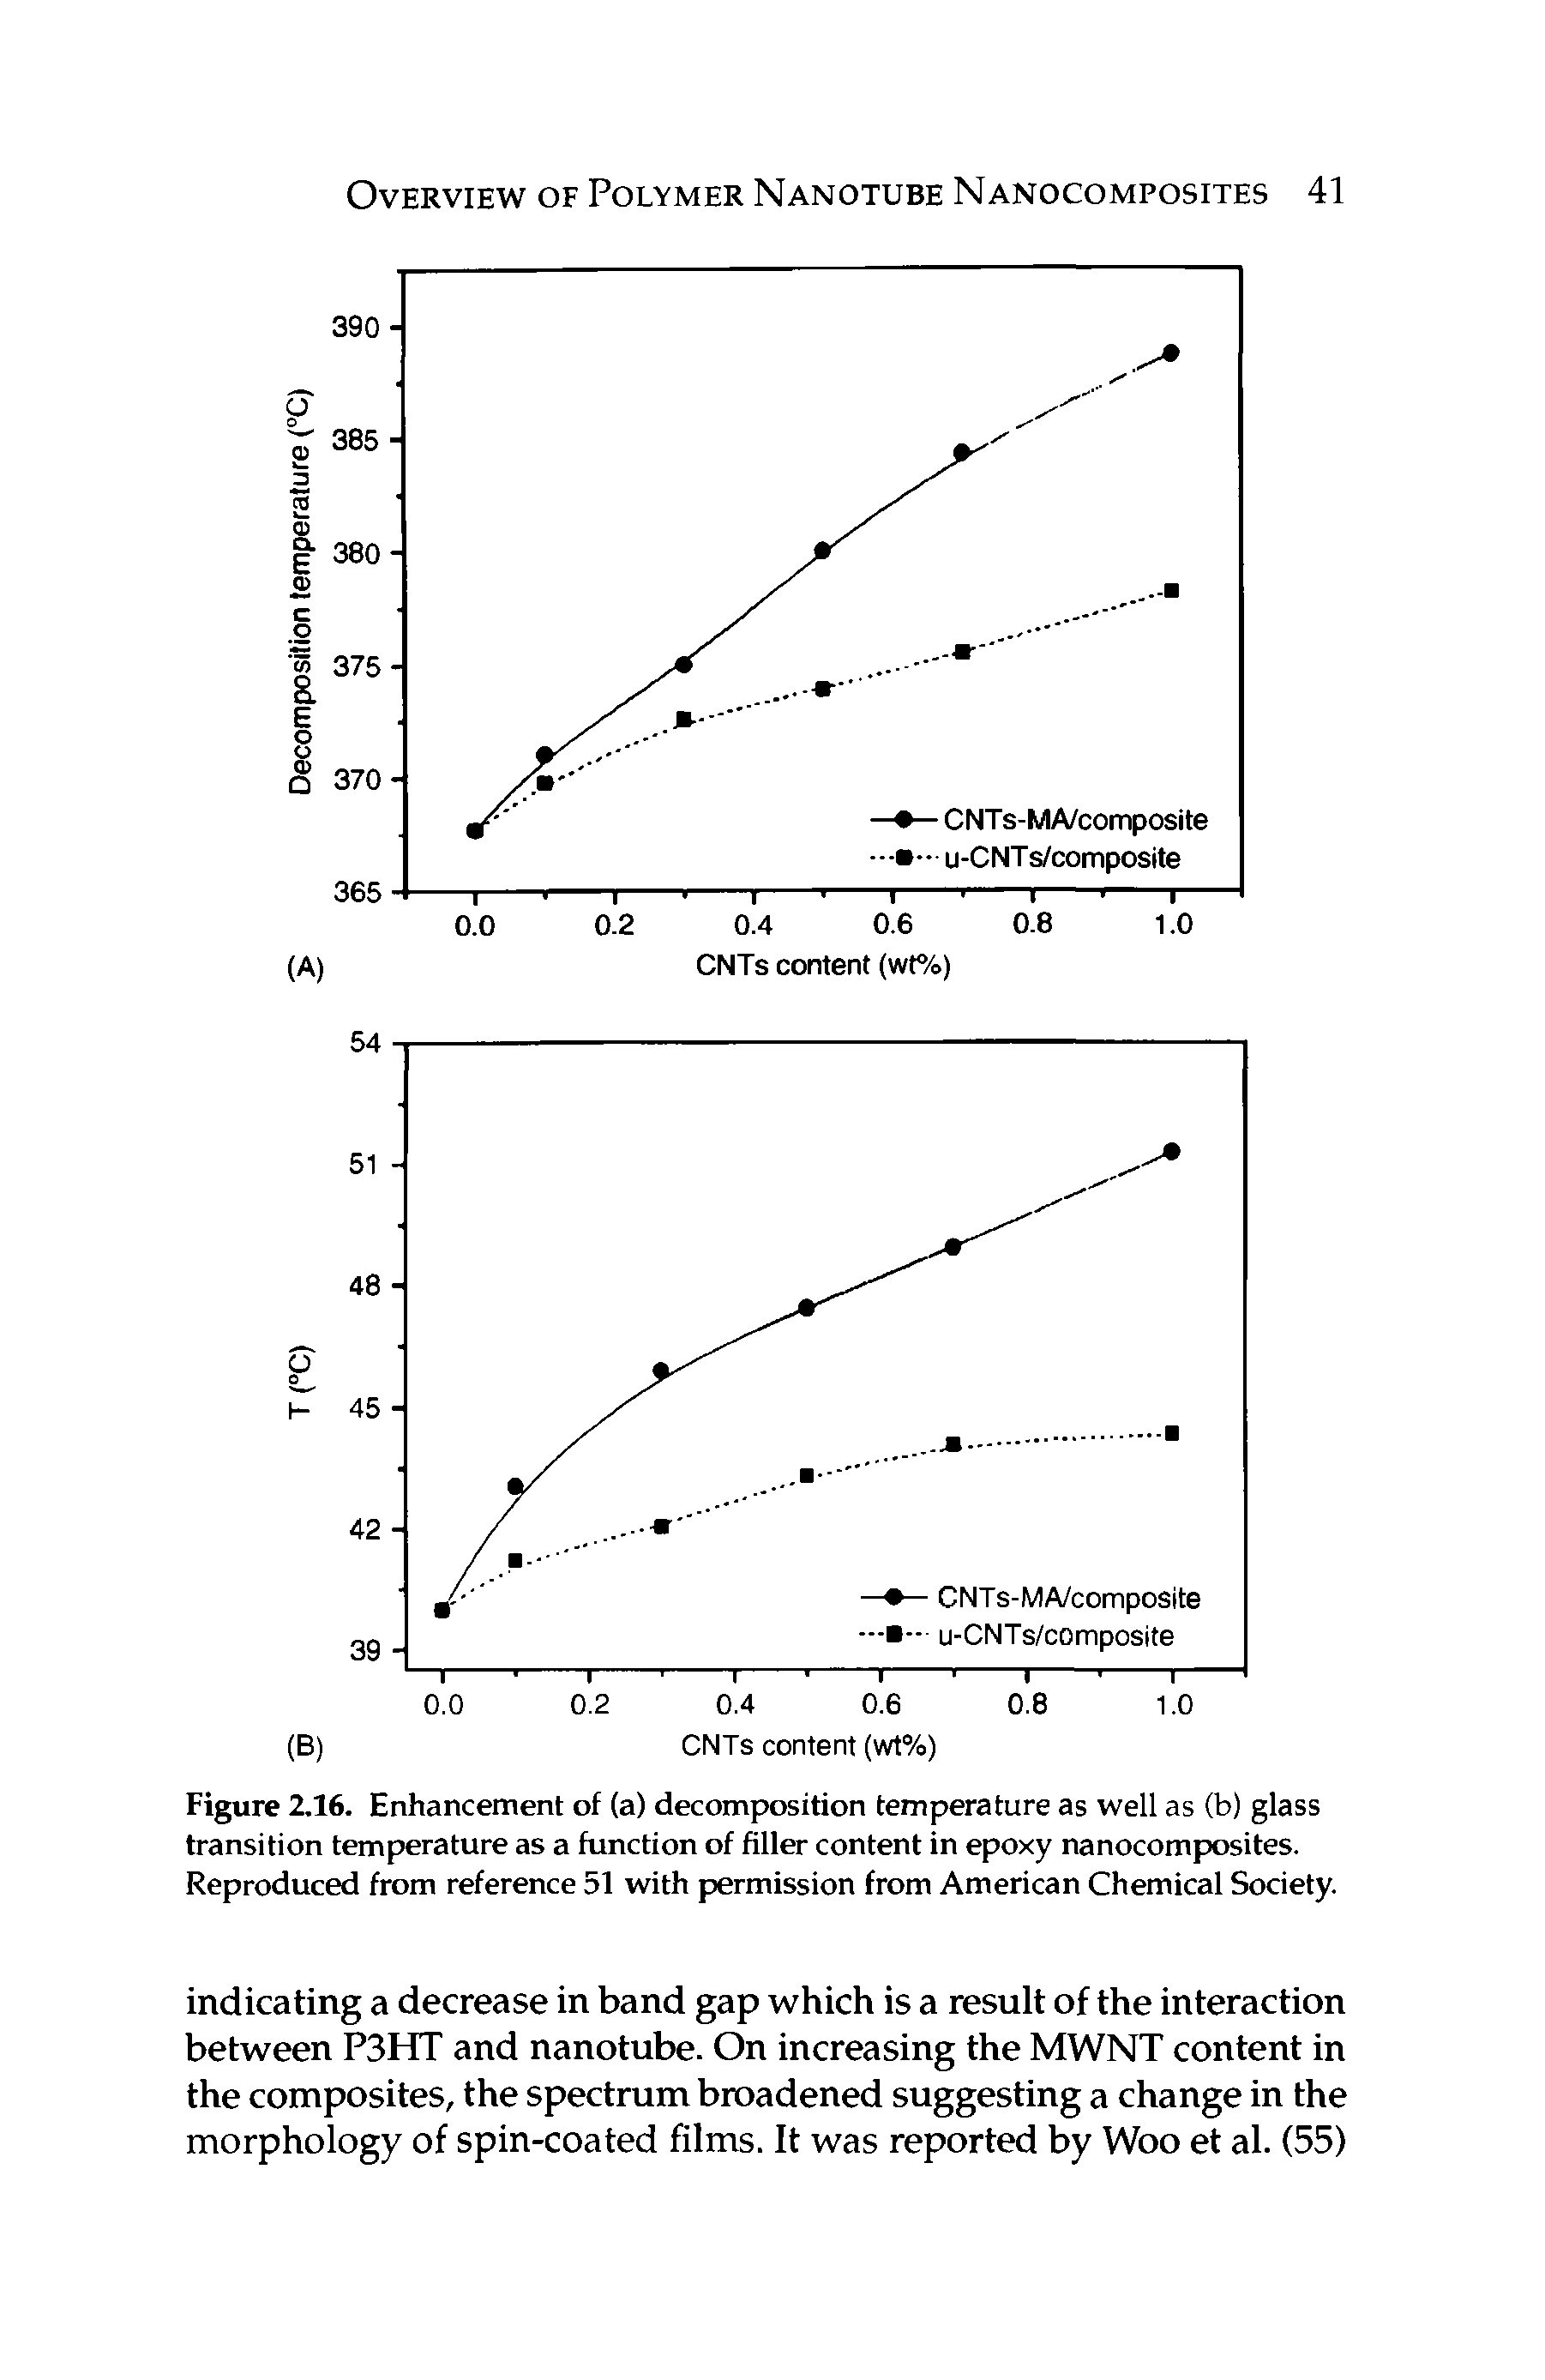 Figure 2.16. Enhancement of (a) decomposition temperature as well as (b) glass transition temperature as a function of filler content in epoxy nanocomposites. Reproduced from reference 51 with permission from American Chemical Society.